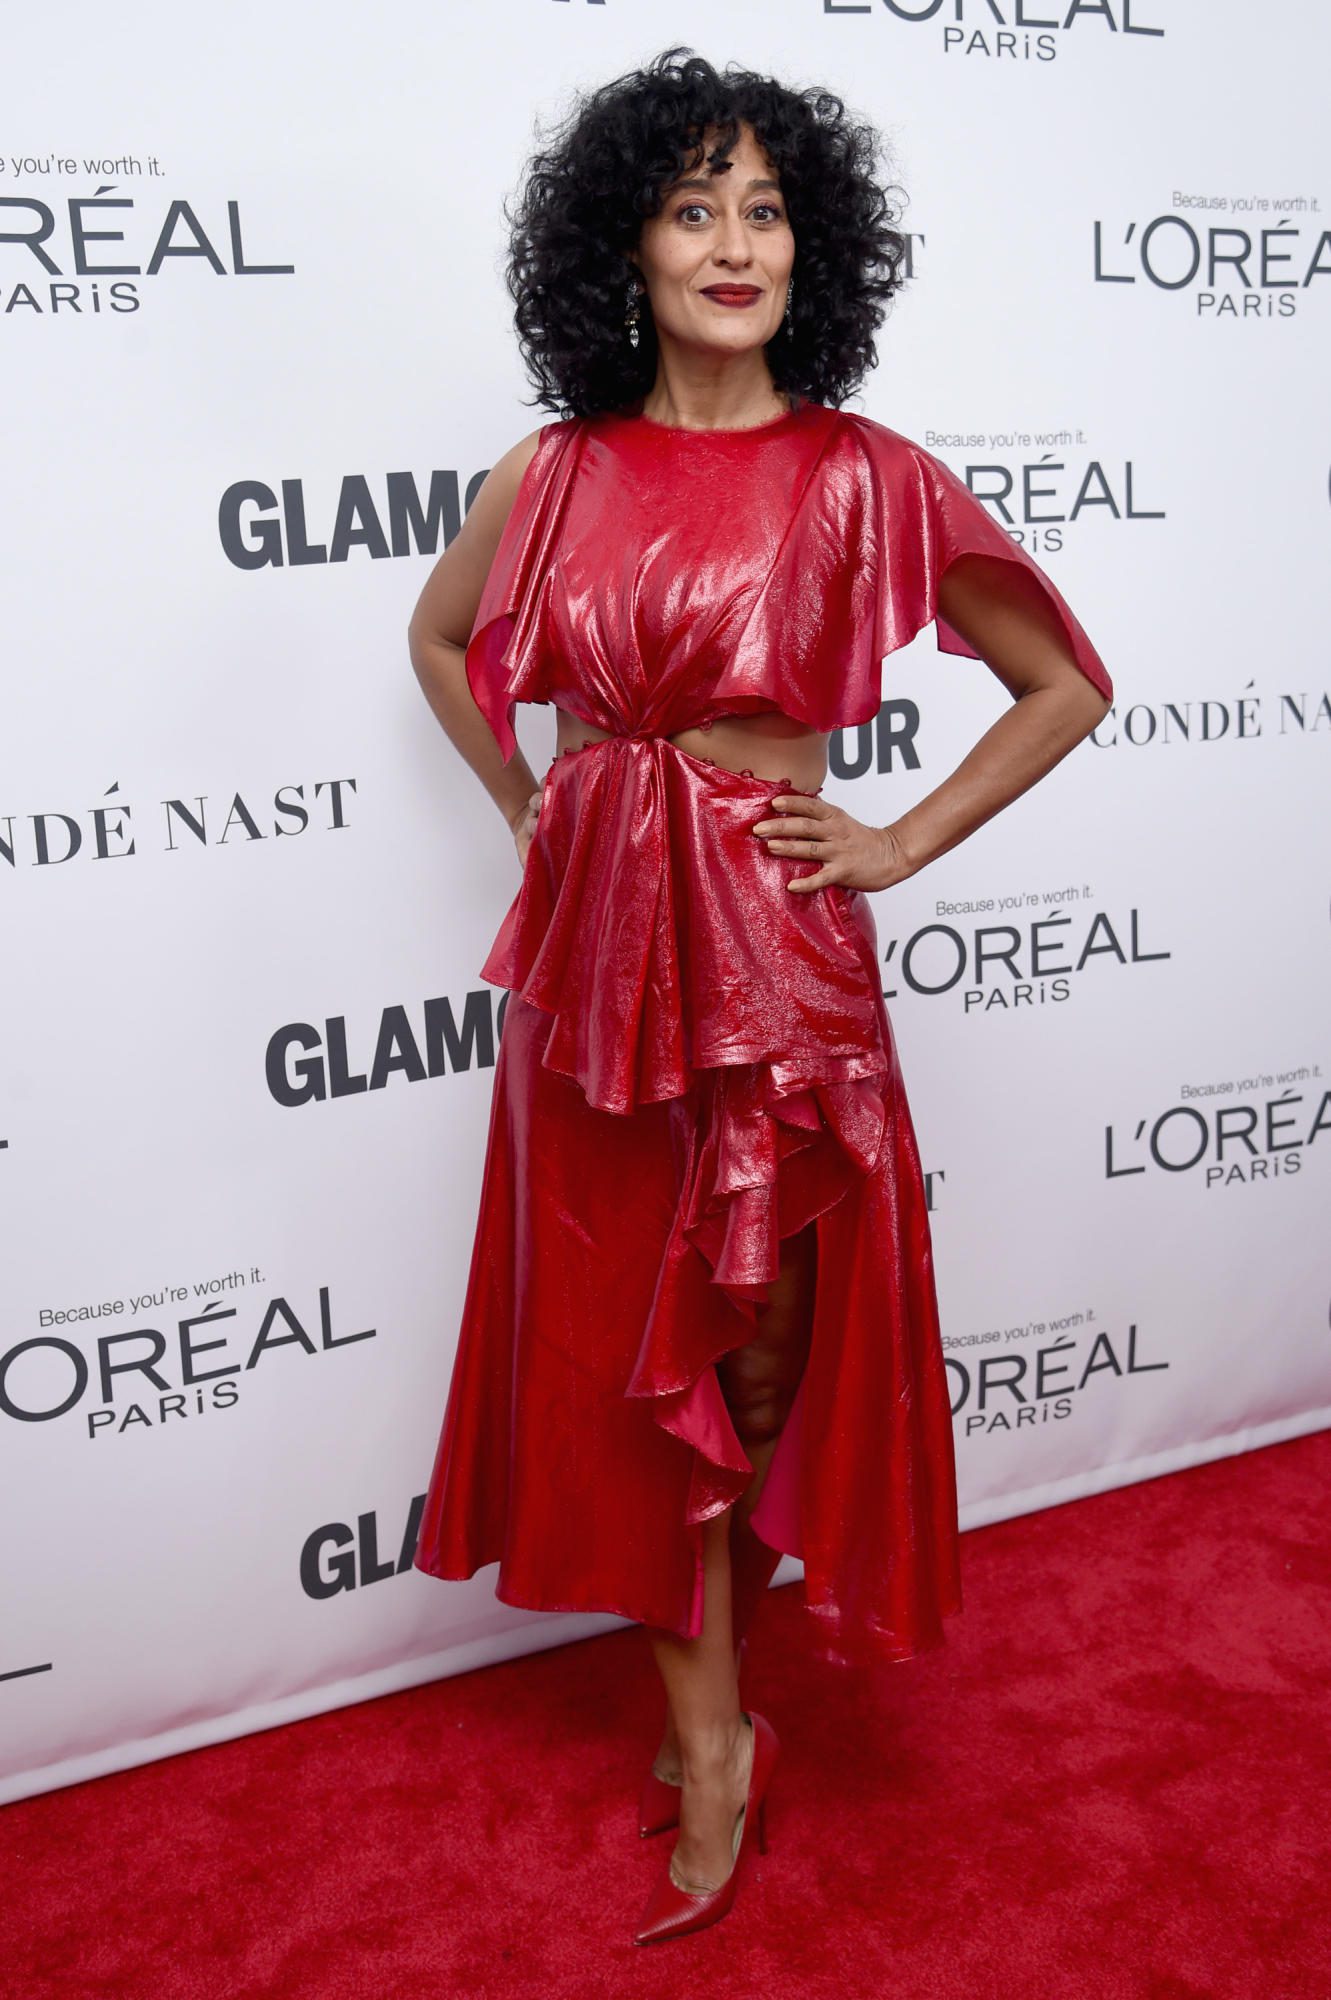 Glamour Magazine's Women of the Year Awards The Report